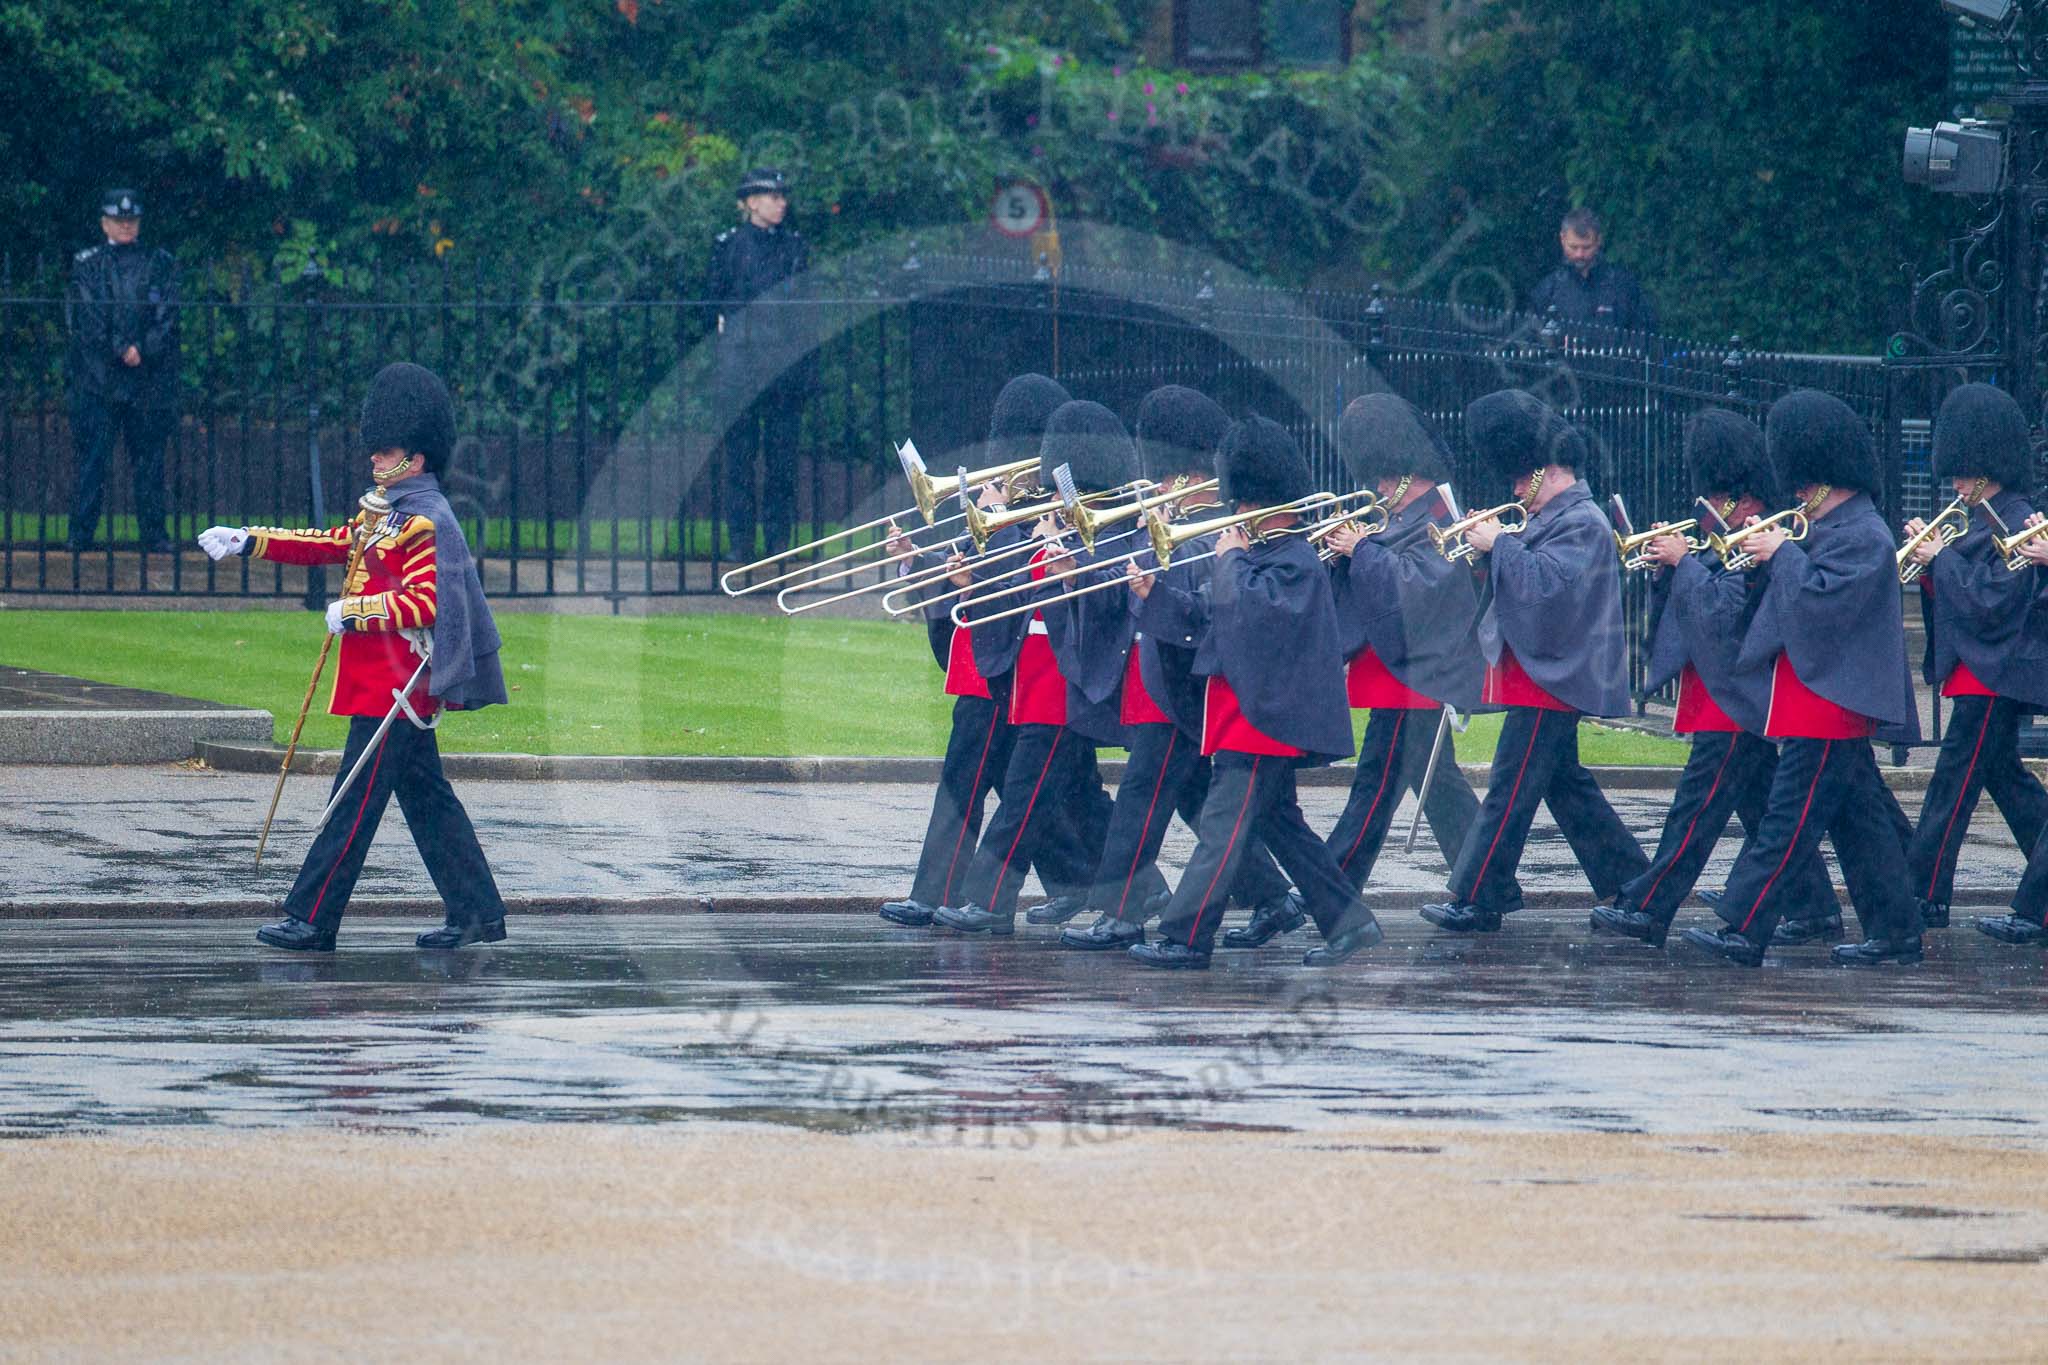 The Colonel's Review 2014.
Horse Guards Parade, Westminster,
London,

United Kingdom,
on 07 June 2014 at 10:13, image #72